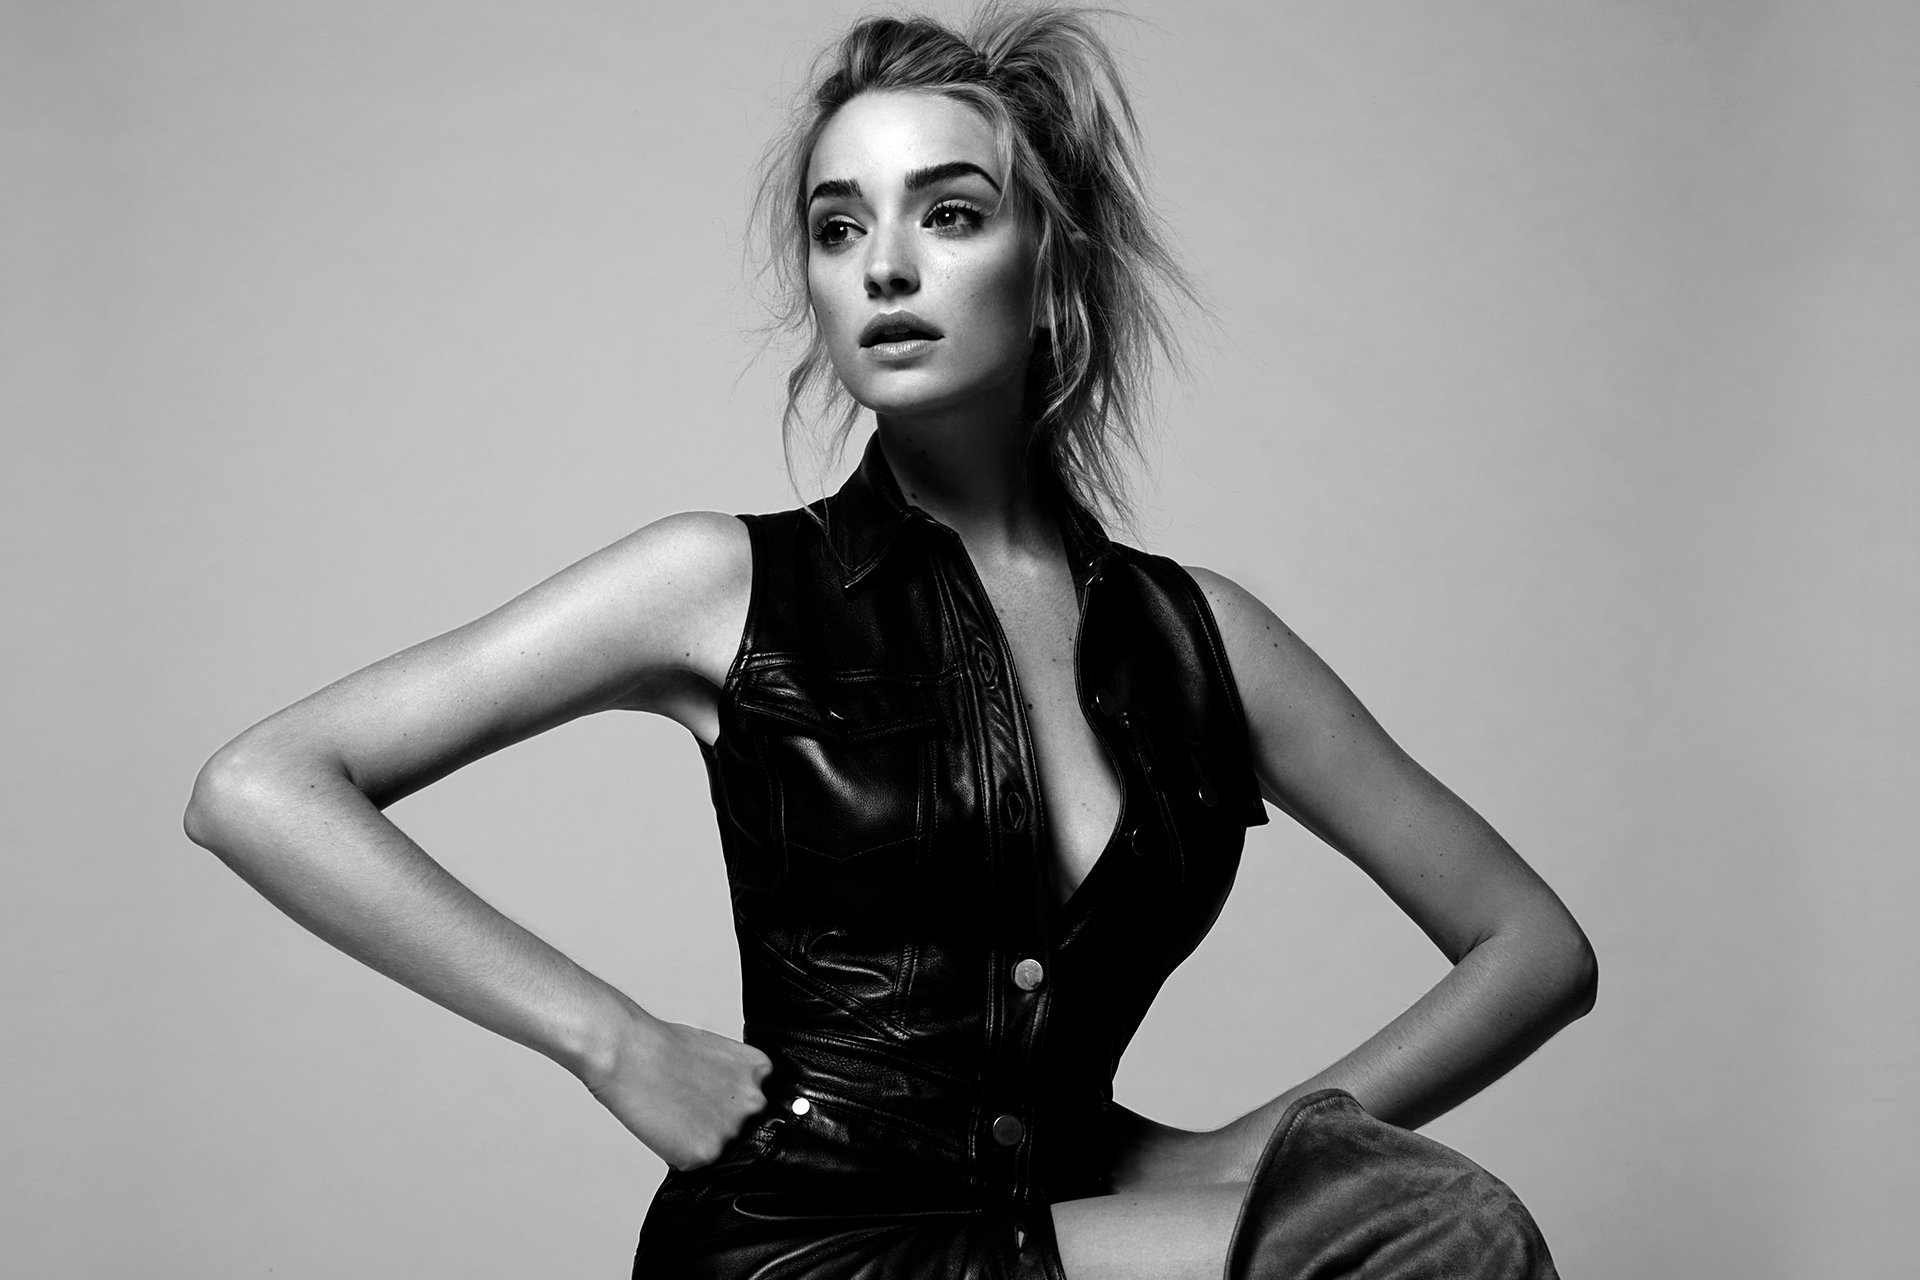 Brianne howey hd papers and backgrounds